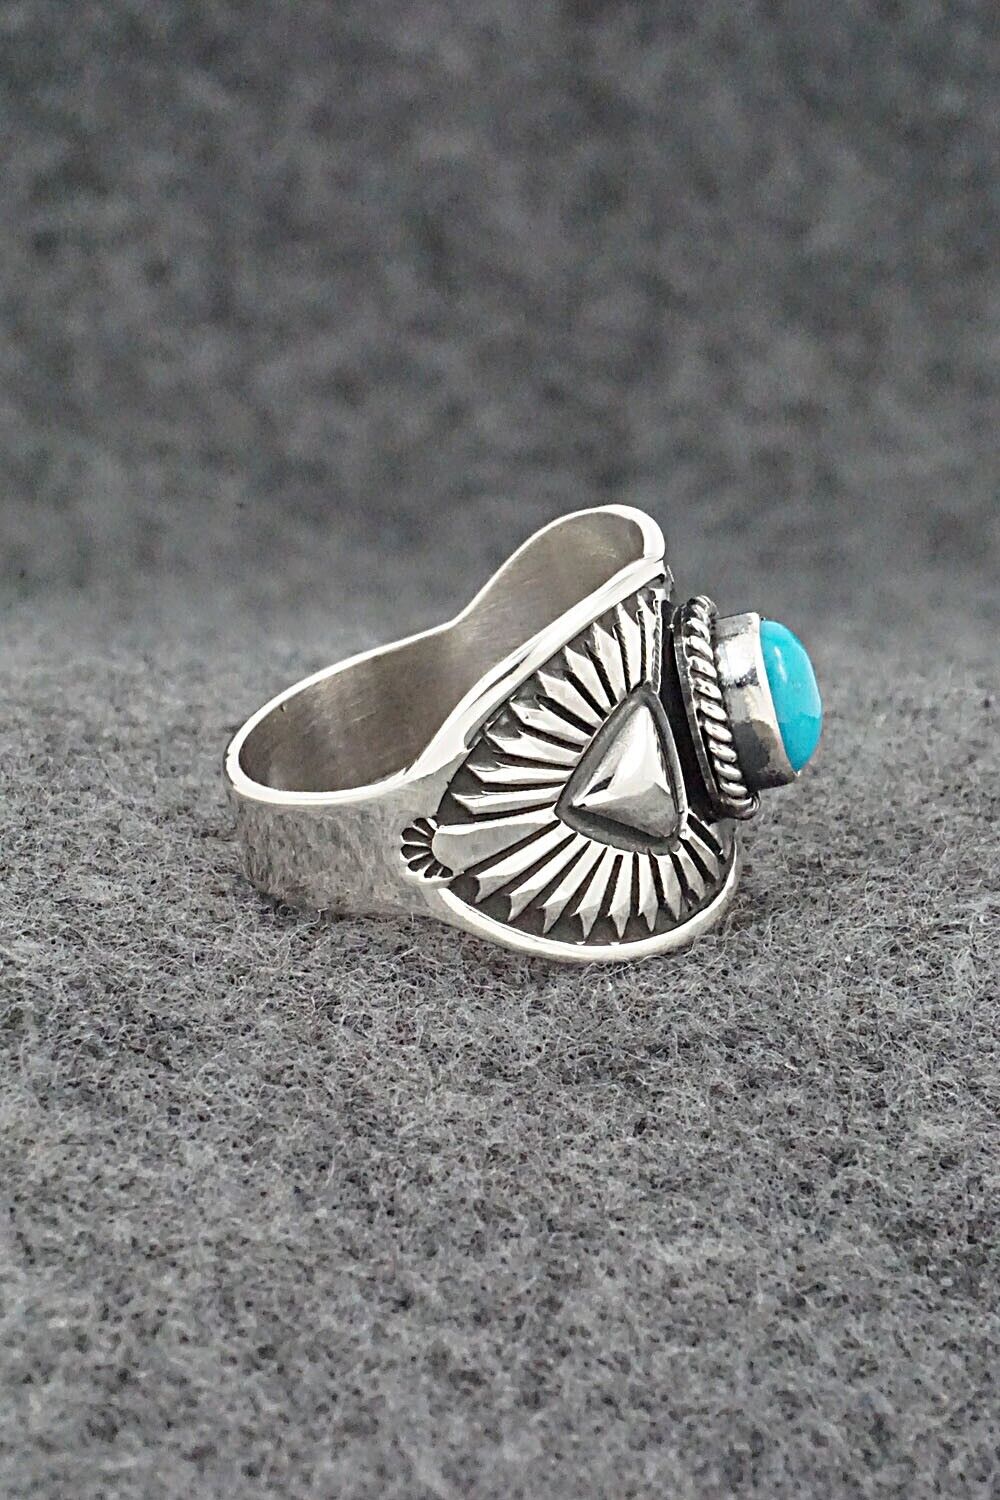 Turquoise & Sterling Silver Ring - Derrick Gordon - Size 9.5